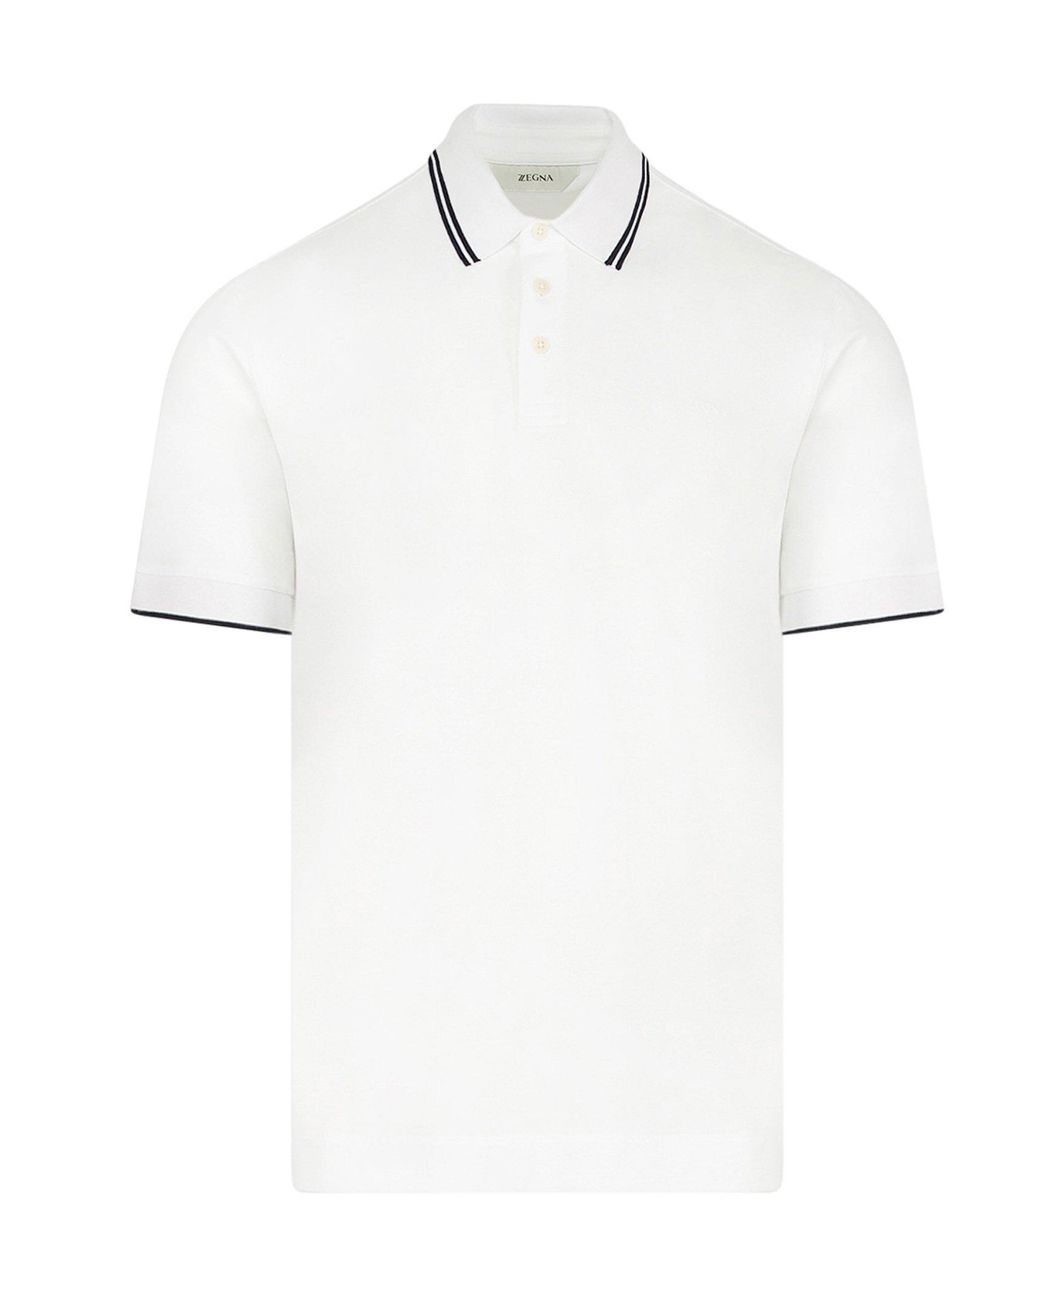 Z Zegna Cotton Classic Polo Shirt in White for Men - Lyst